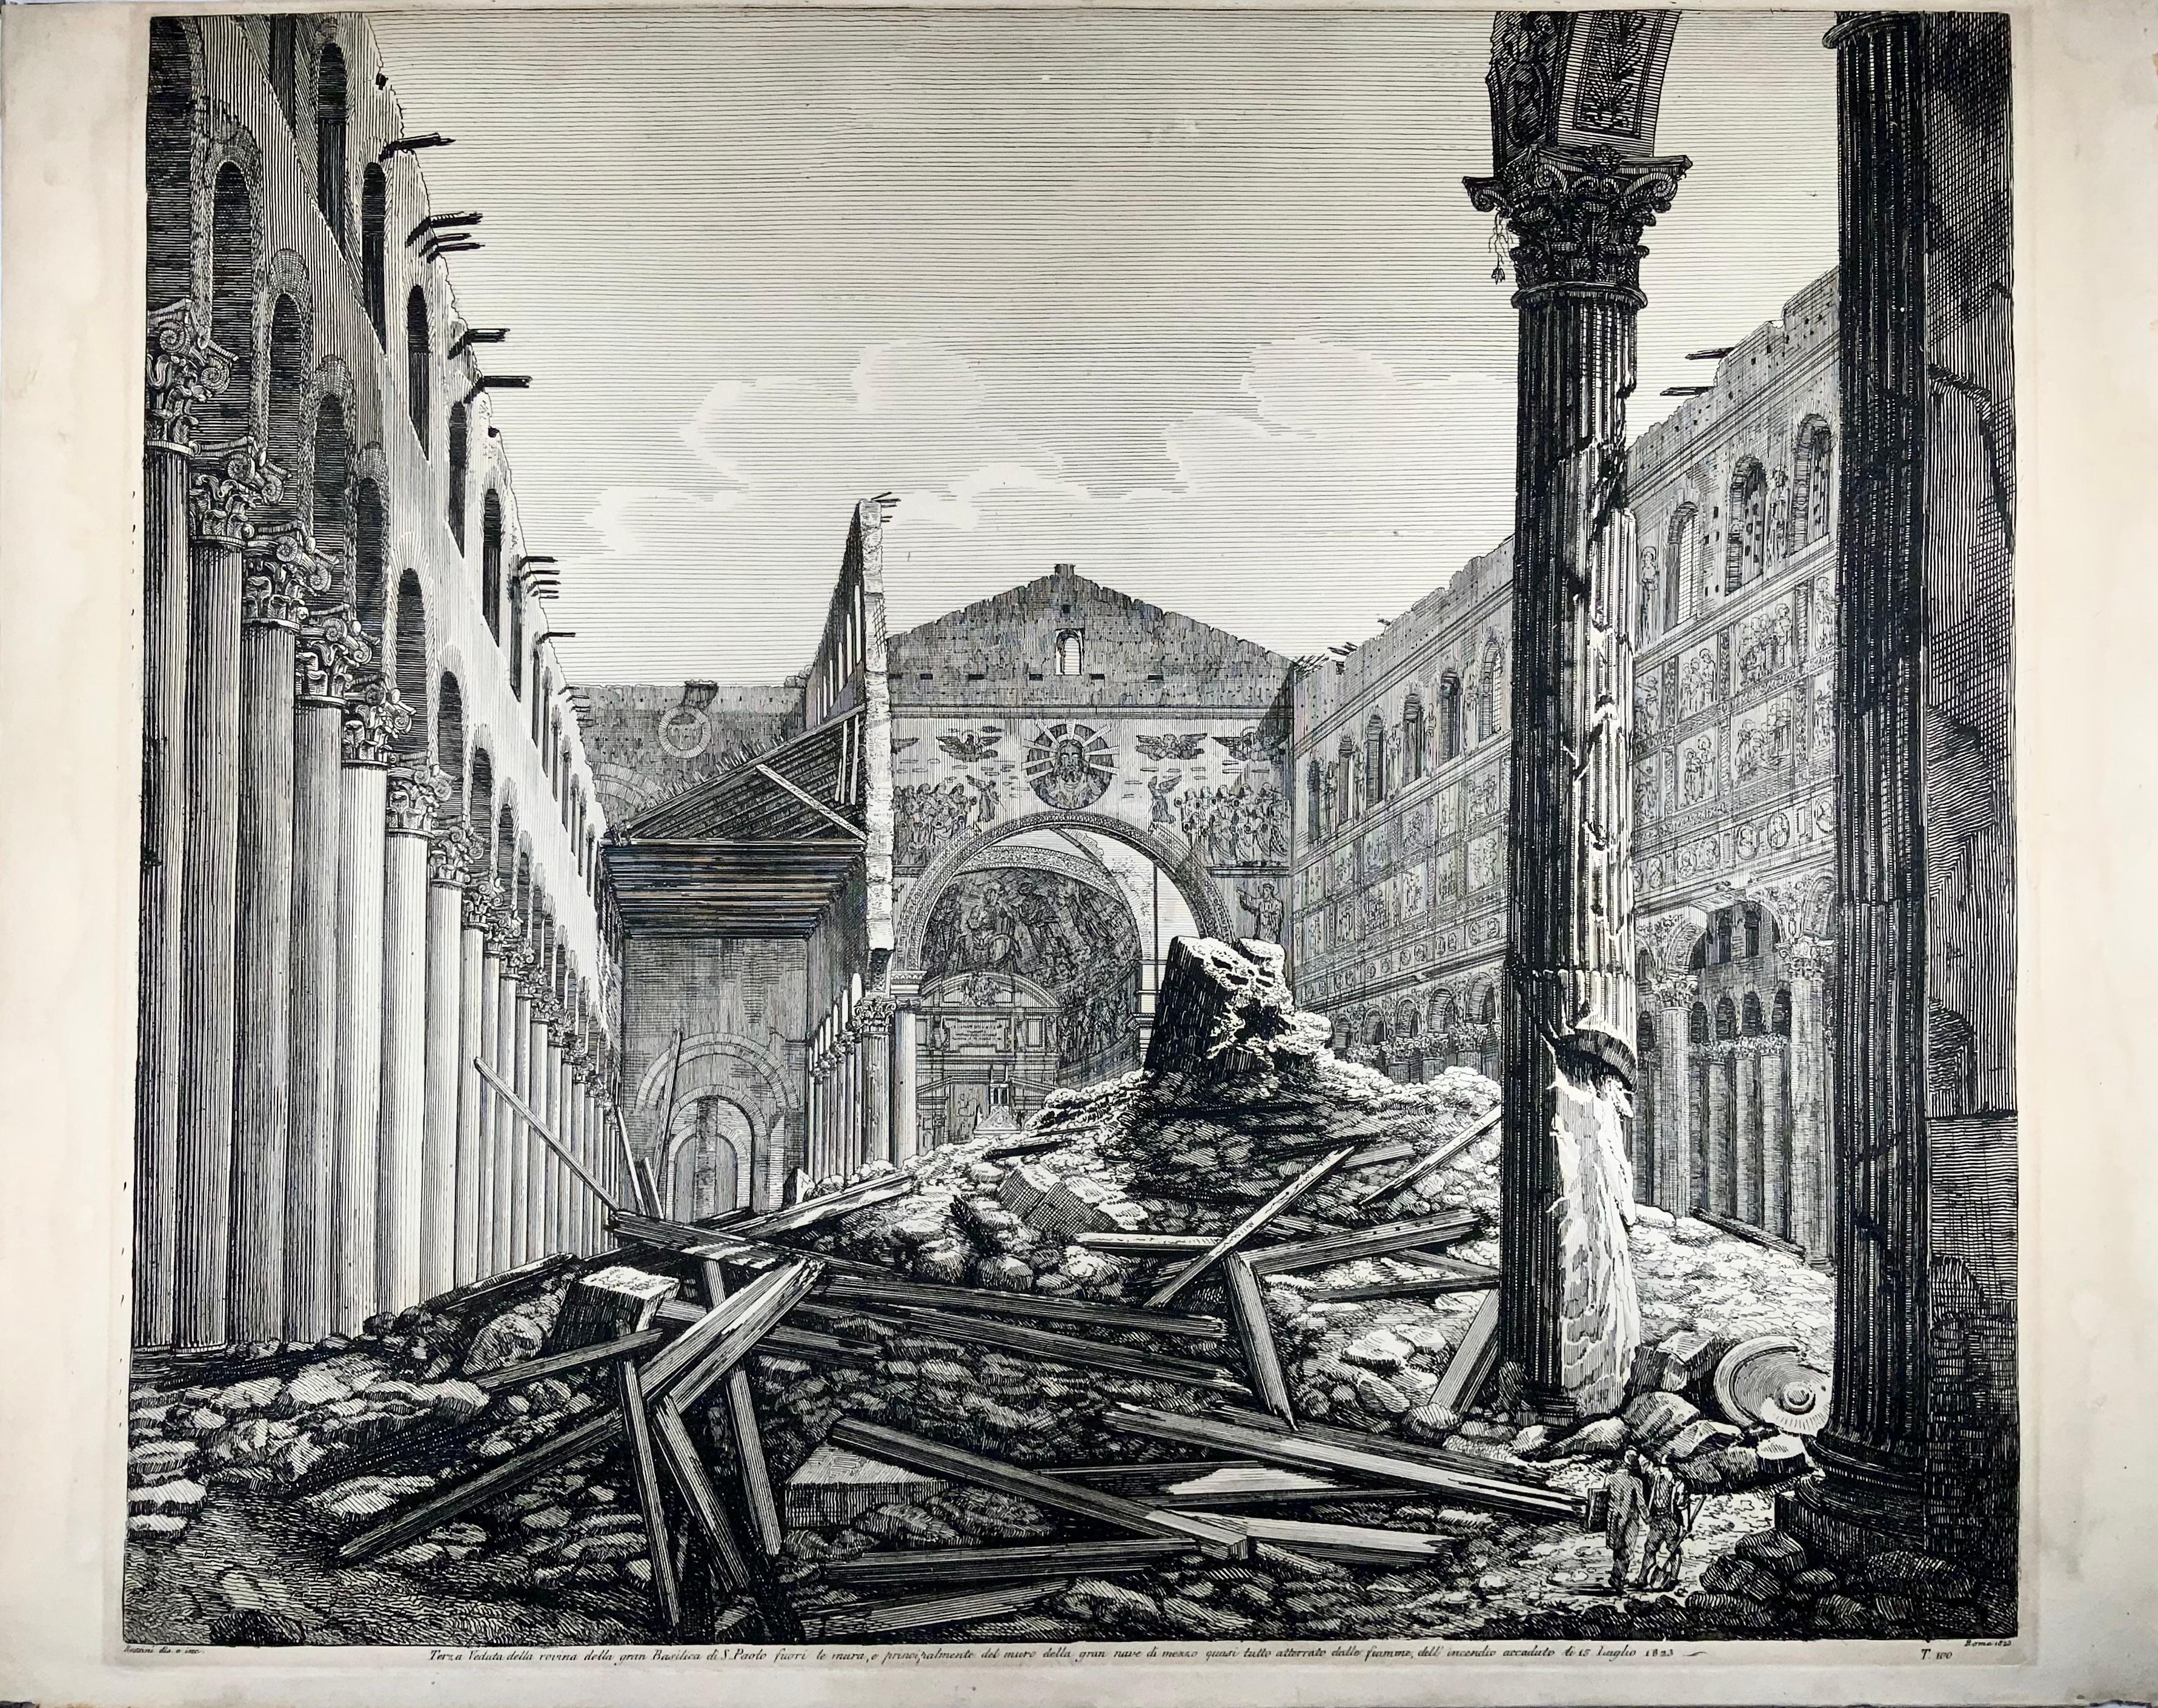 Signed and dated by Rossini in the plate along the lower margin. Printed on early 19th century thick wove paper and with margins beyond the plate-impression on all sides.

The Destruction of Basilica St. Paul. On 15 July 1823, a workman repairing